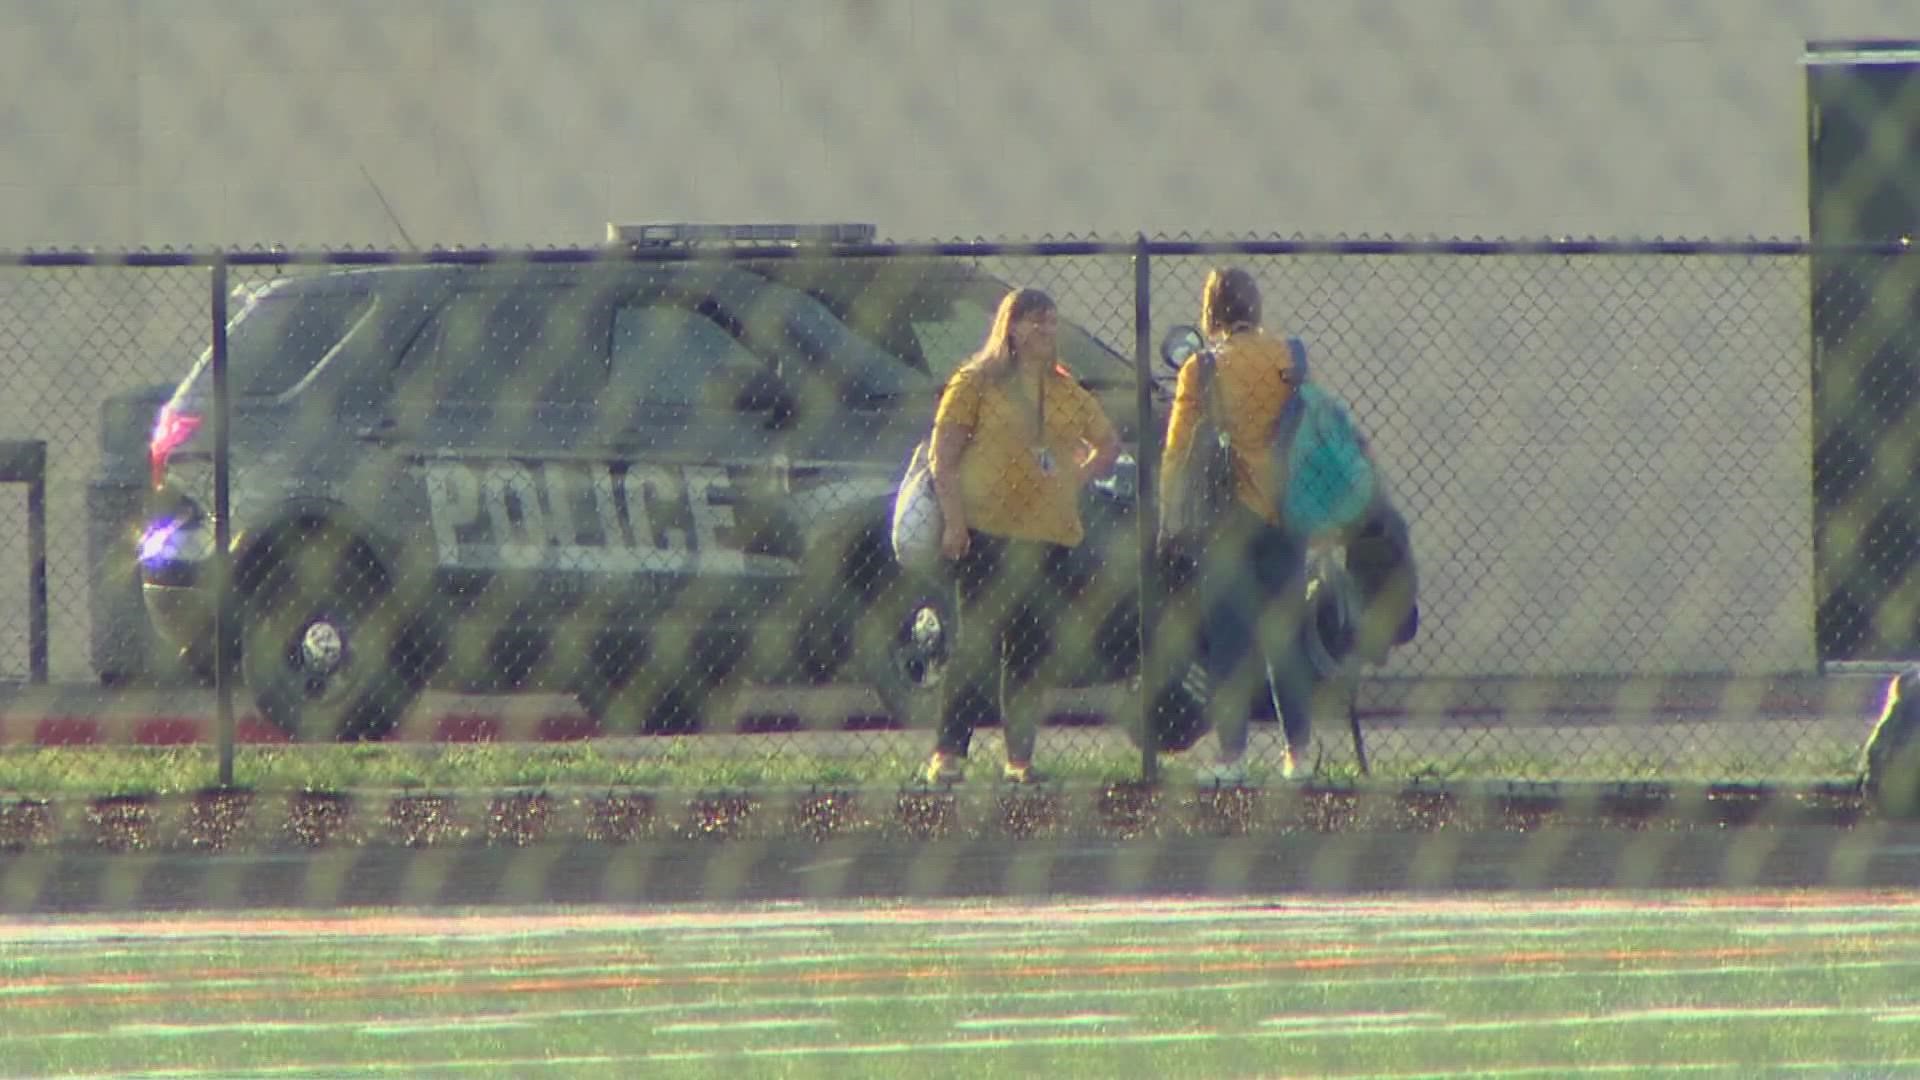 Multiple agencies responded to the Blaine school campus after a student received threats.